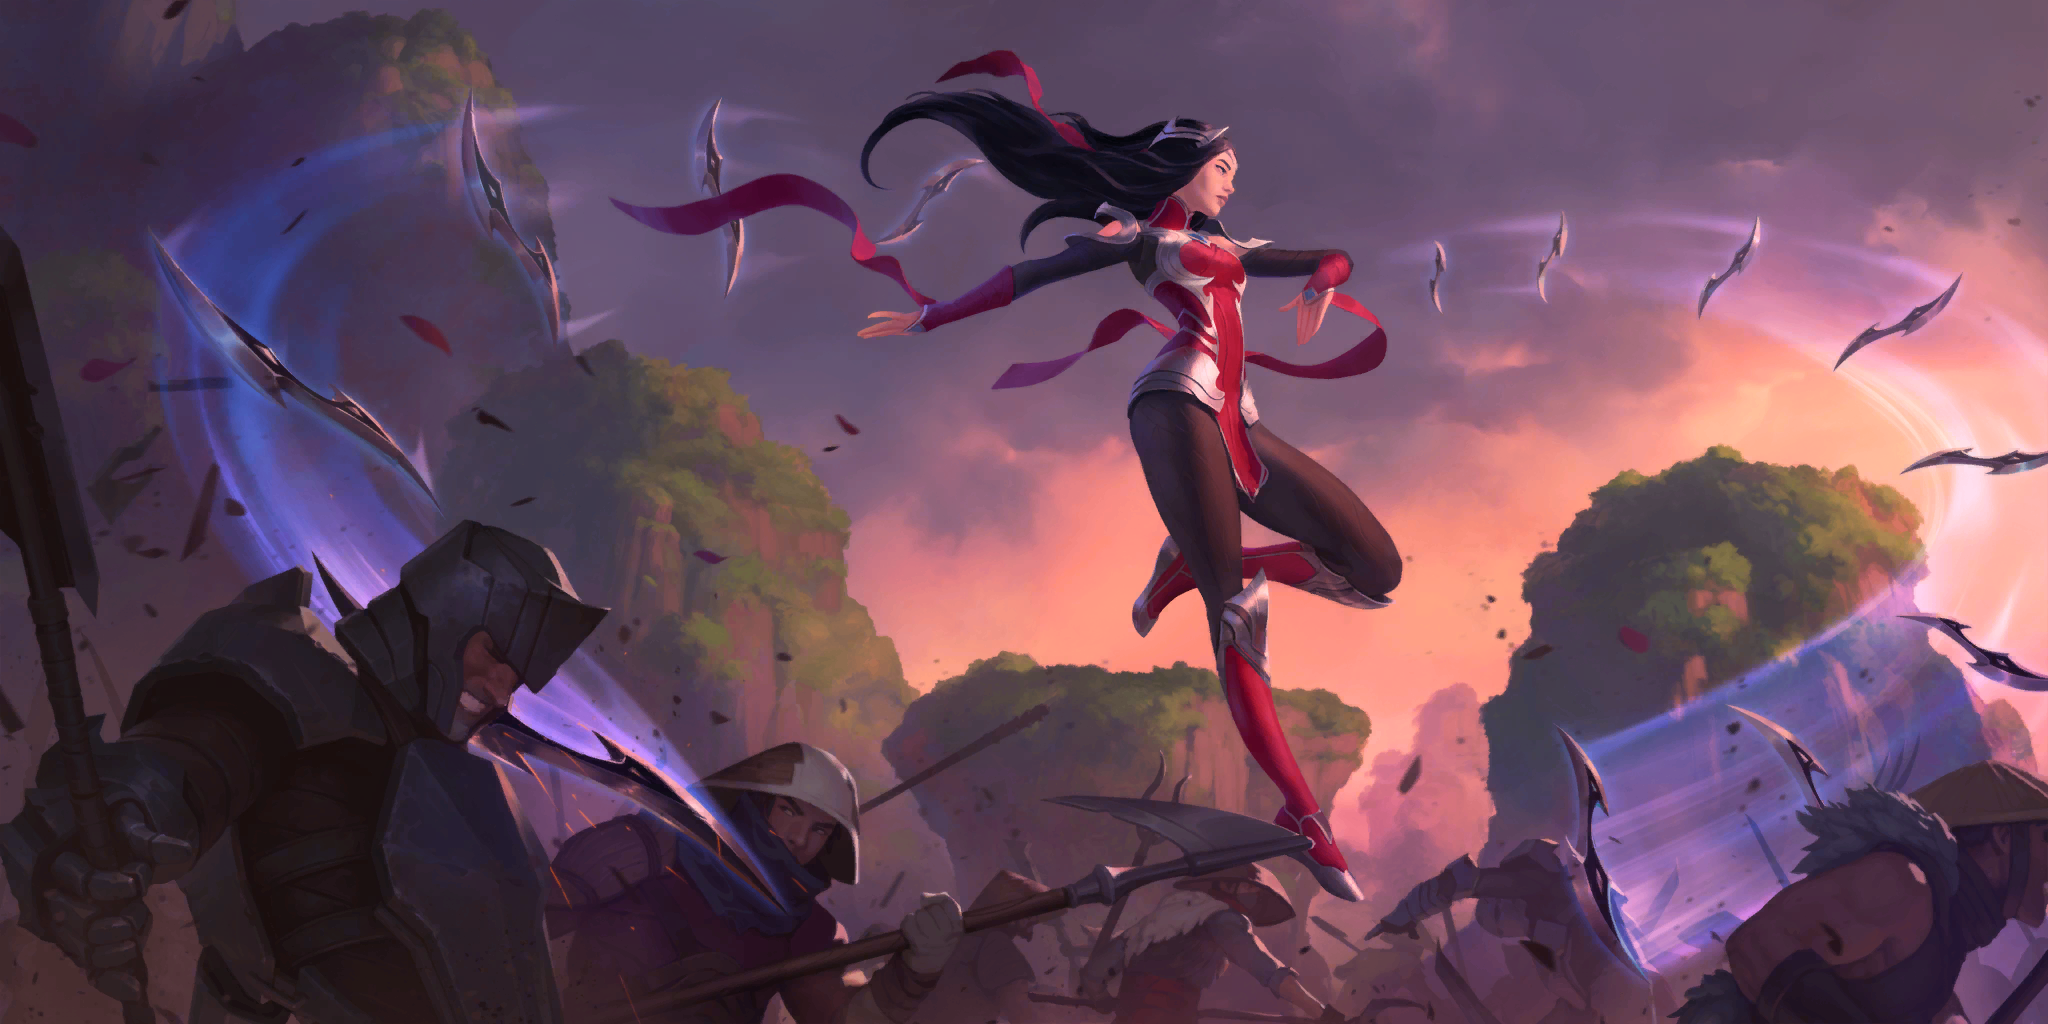 Void Irelia - About lol's lore - I created this project continuing the  game's lore, the story takes place in Ionia, check it out! : r/loreofleague